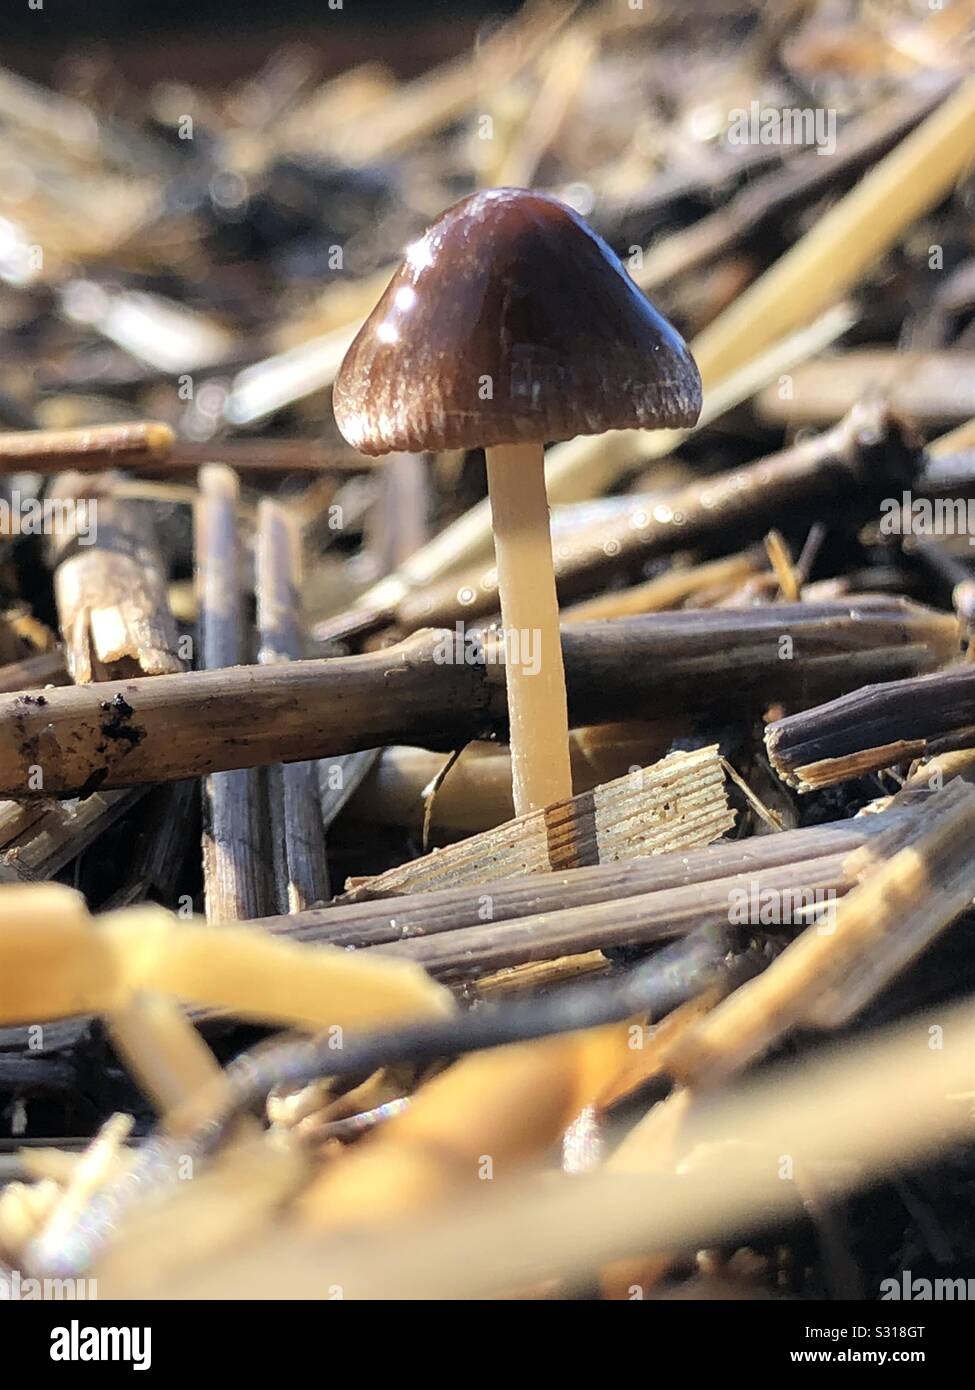 A tiny mushroom growing in a compost pile. Stock Photo